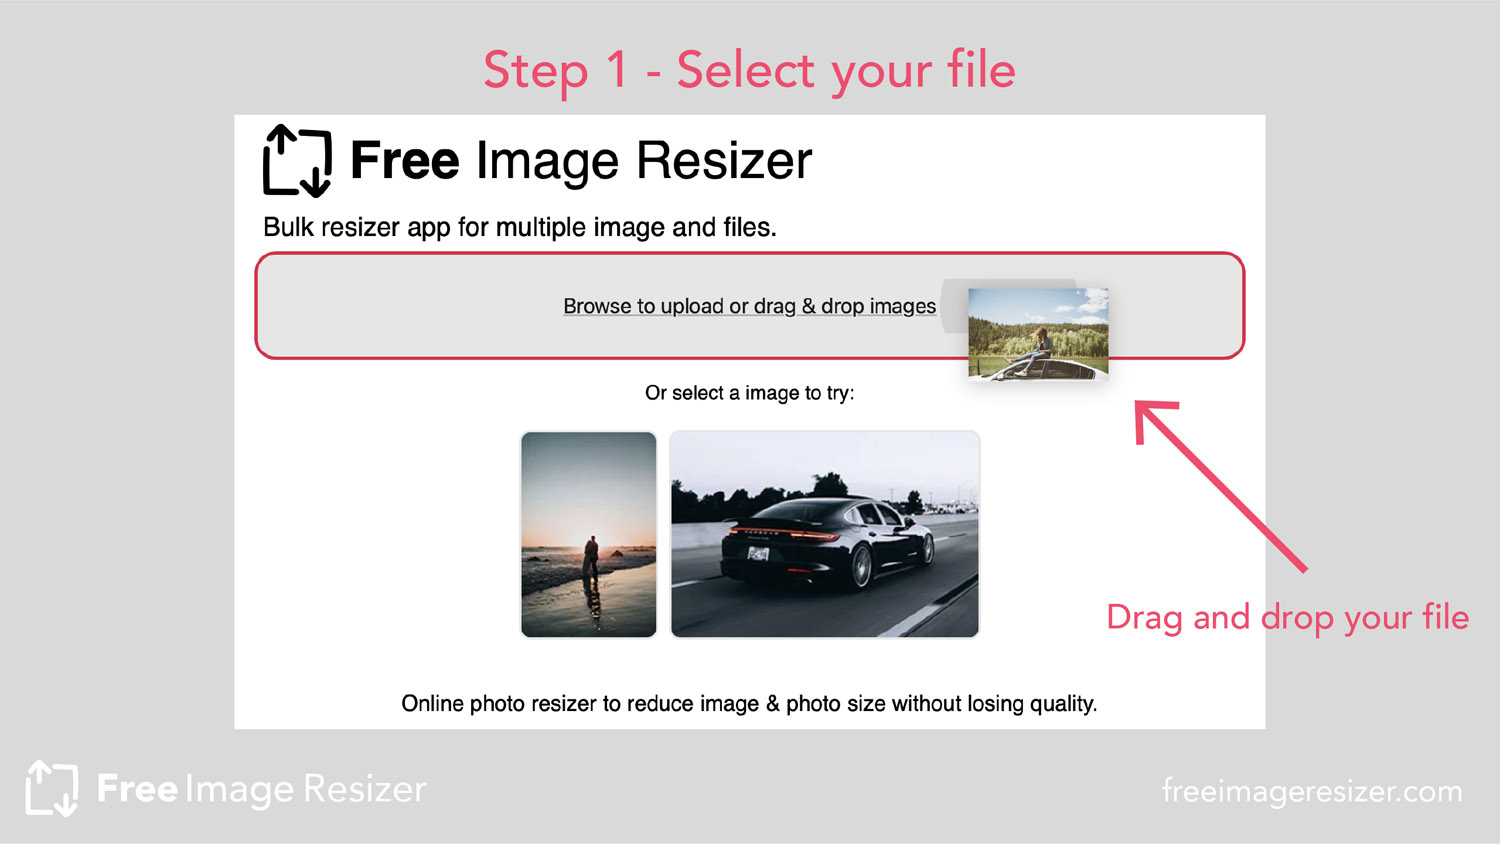 Drag and drop your images to resize to 720p or 1920x720 using an online tool